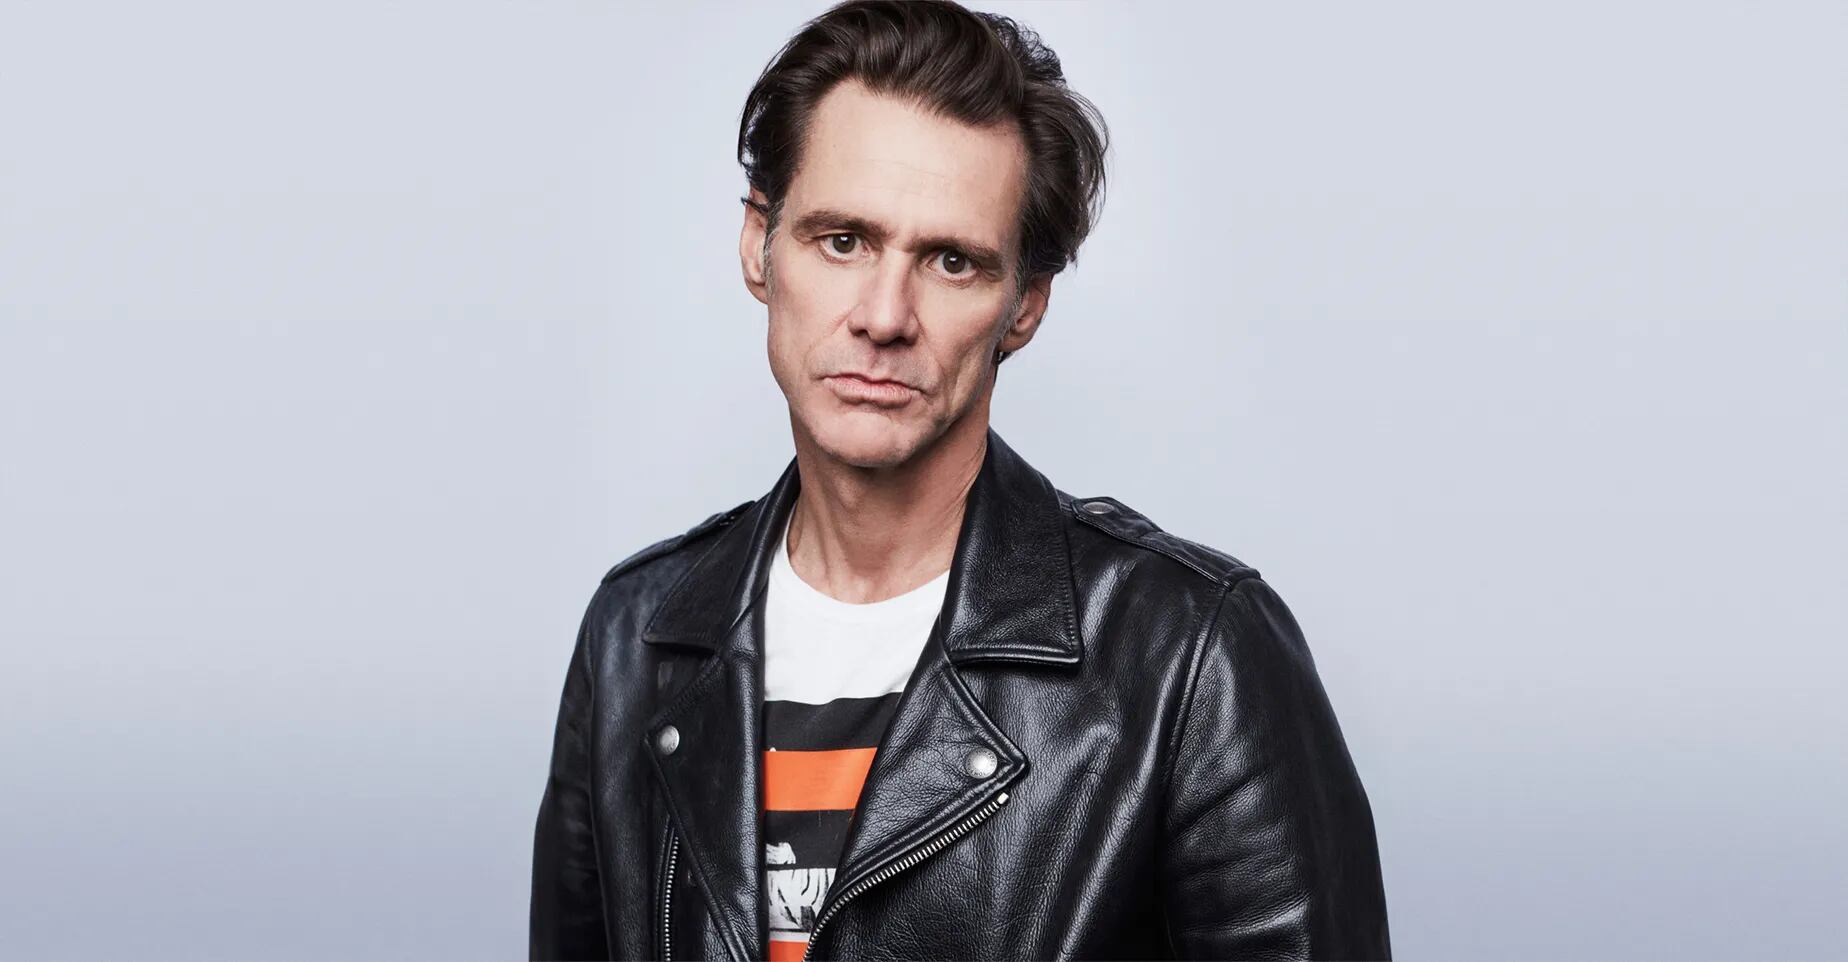 TORONTO, ON - SEPTEMBER 11:  Jim Carrey from the film "Jim &amp; Andy: the Great Beyond - the story of Jim Carrey &amp; Andy Kaufman with a very special, contractually obligated mention of Tony Clifton" poses for a portrait during the 2017 Toronto International Film Festival at Intercontinental Hotel on September 11, 2017 in Toronto, Canada.  (Photo by Maarten de Boer/Contour by Getty Images)